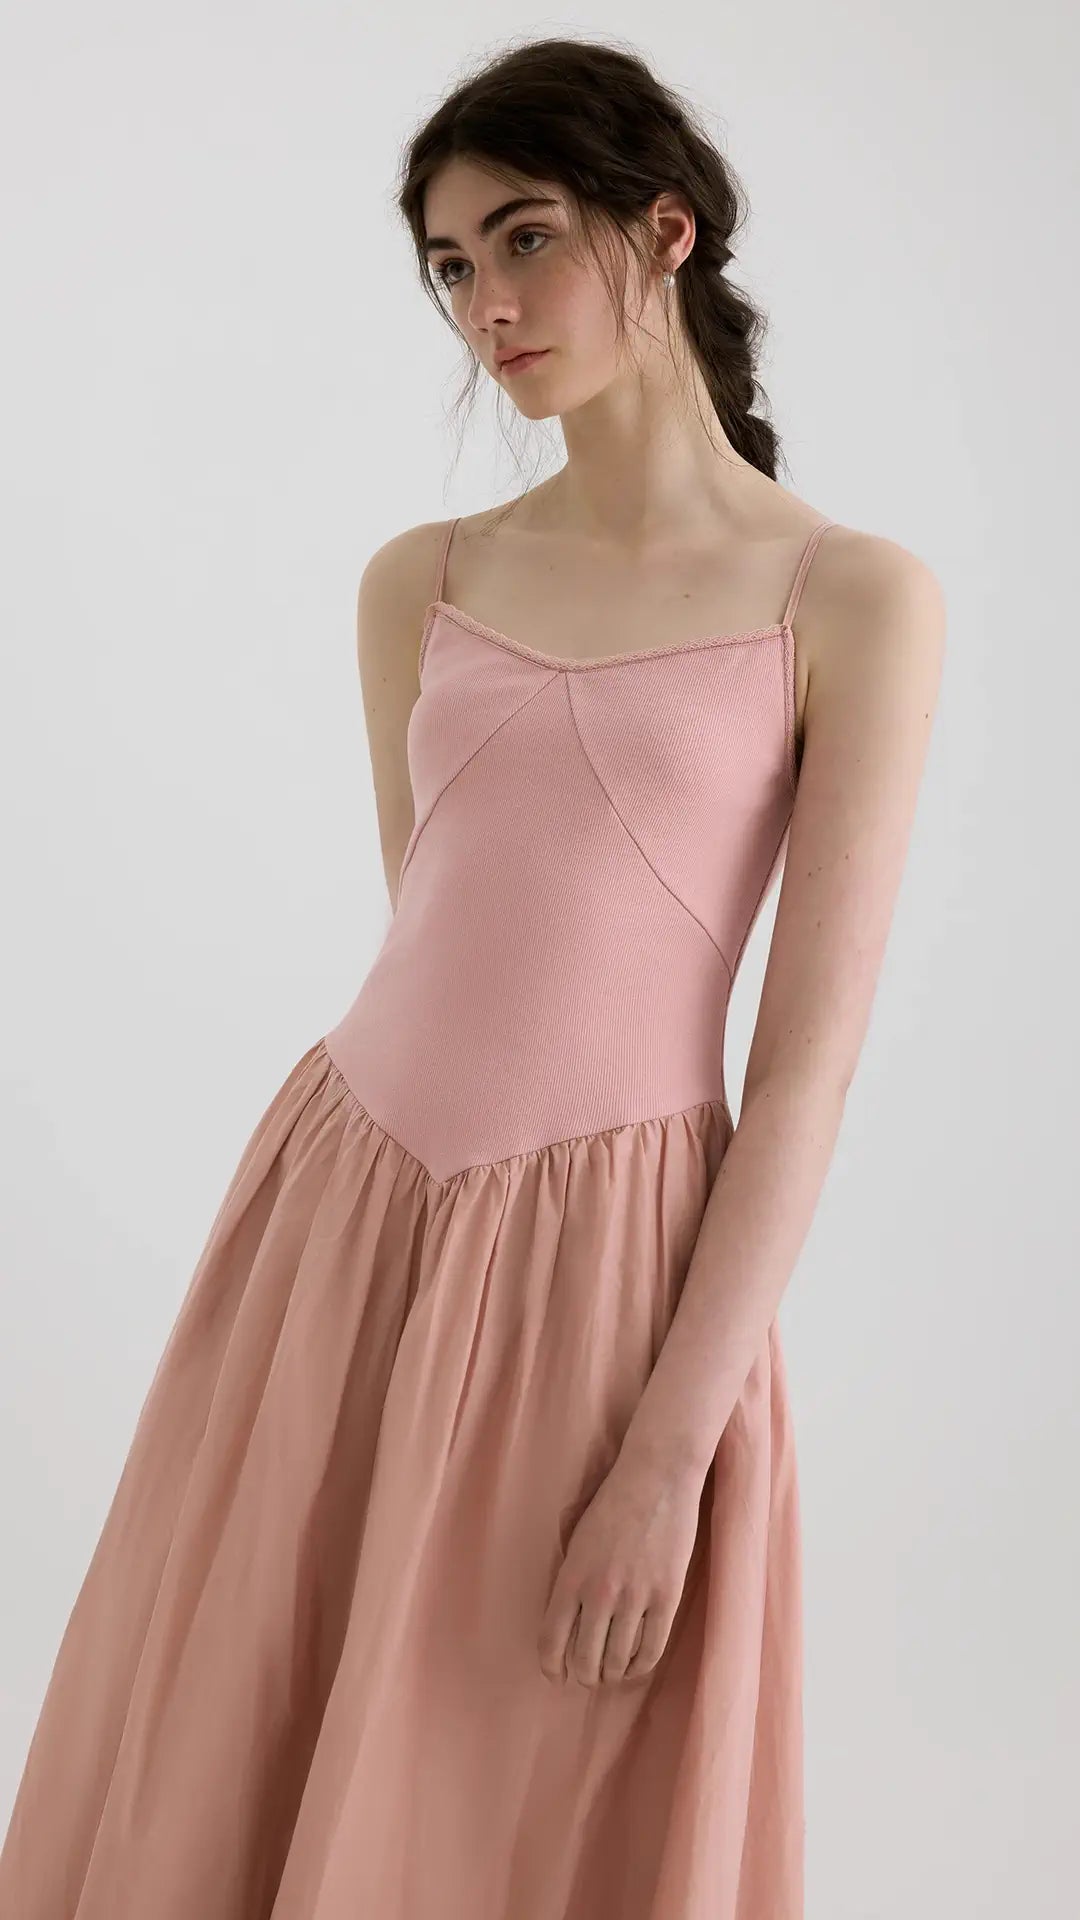 Summer Ballet Dress with Knit Patchwork and Puffy Hem in Long Cotton